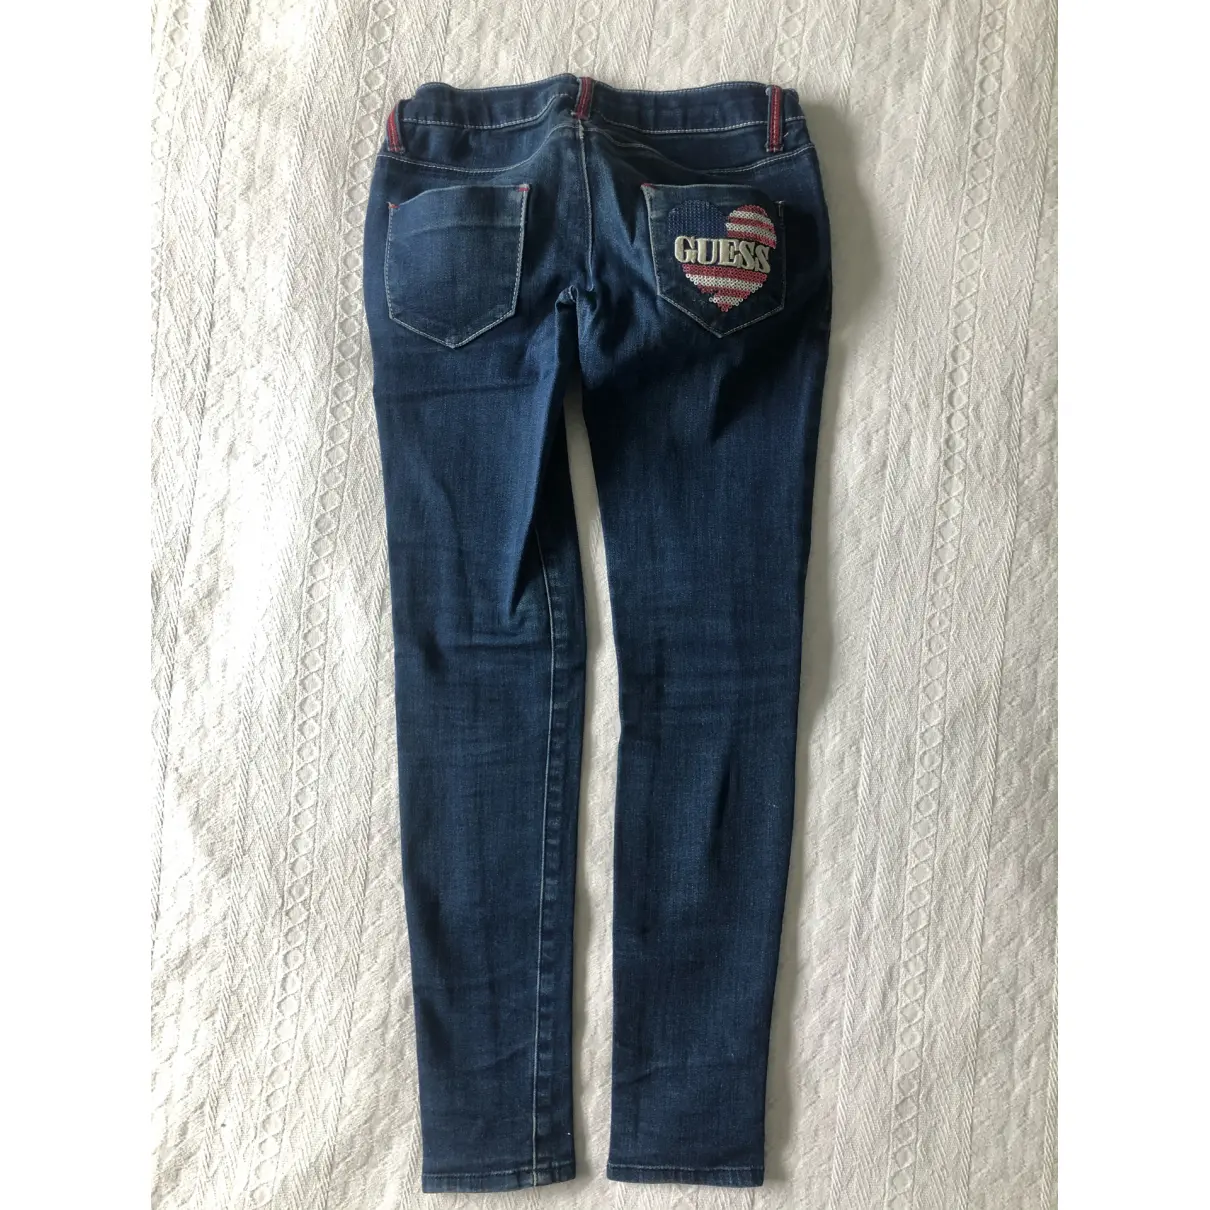 Buy GUESS Jeans online